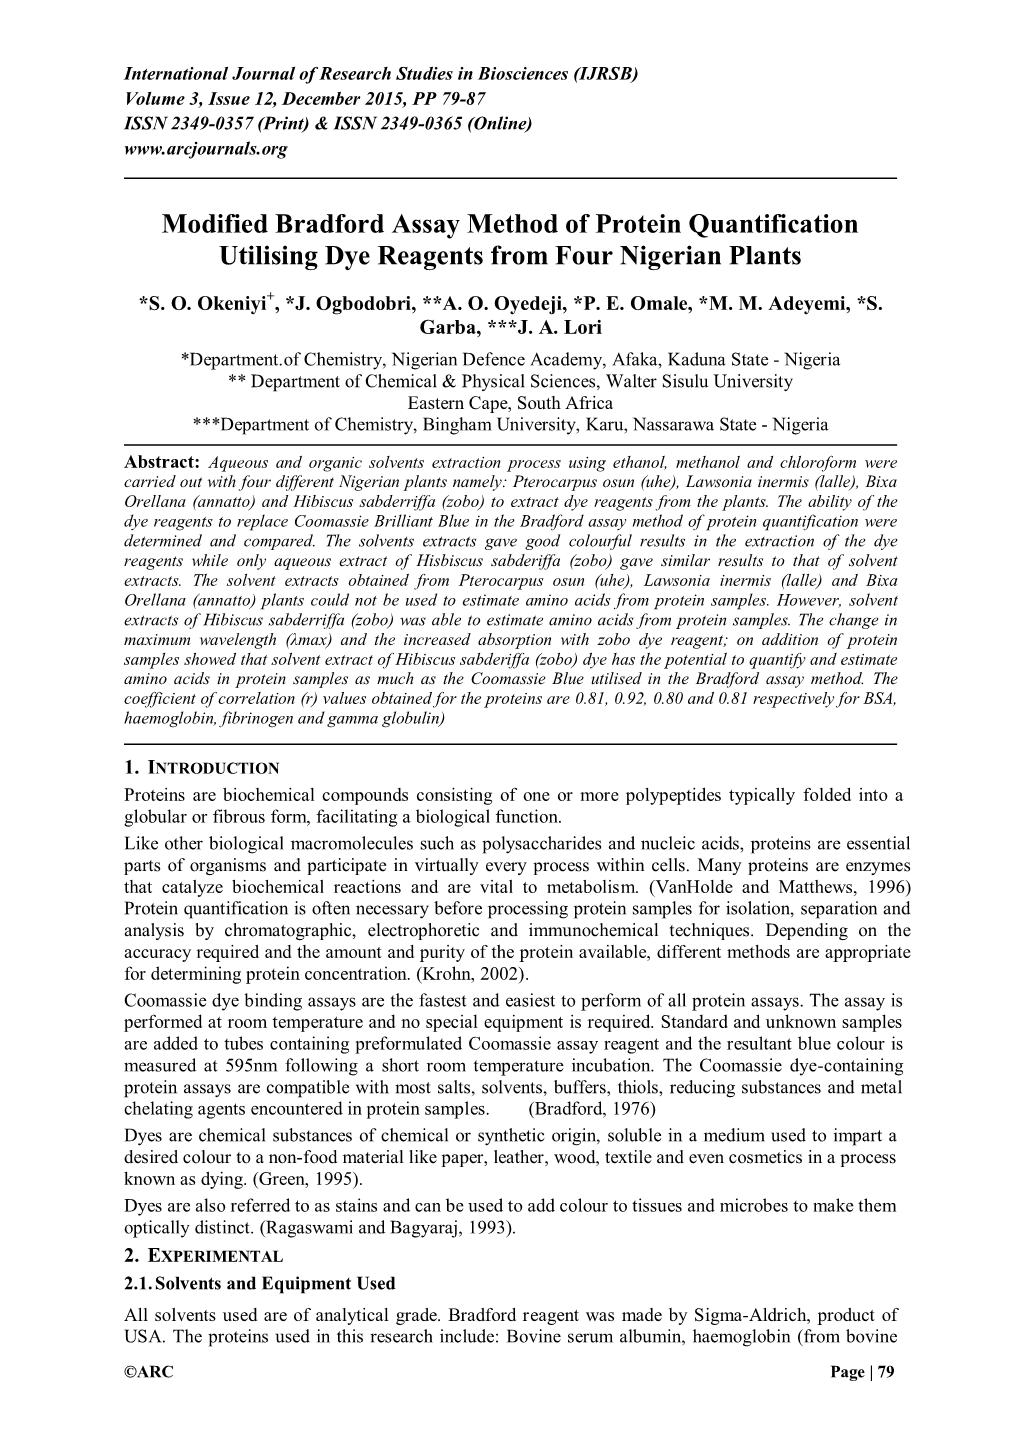 Modified Bradford Assay Method of Protein Quantification Utilising Dye Reagents from Four Nigerian Plants